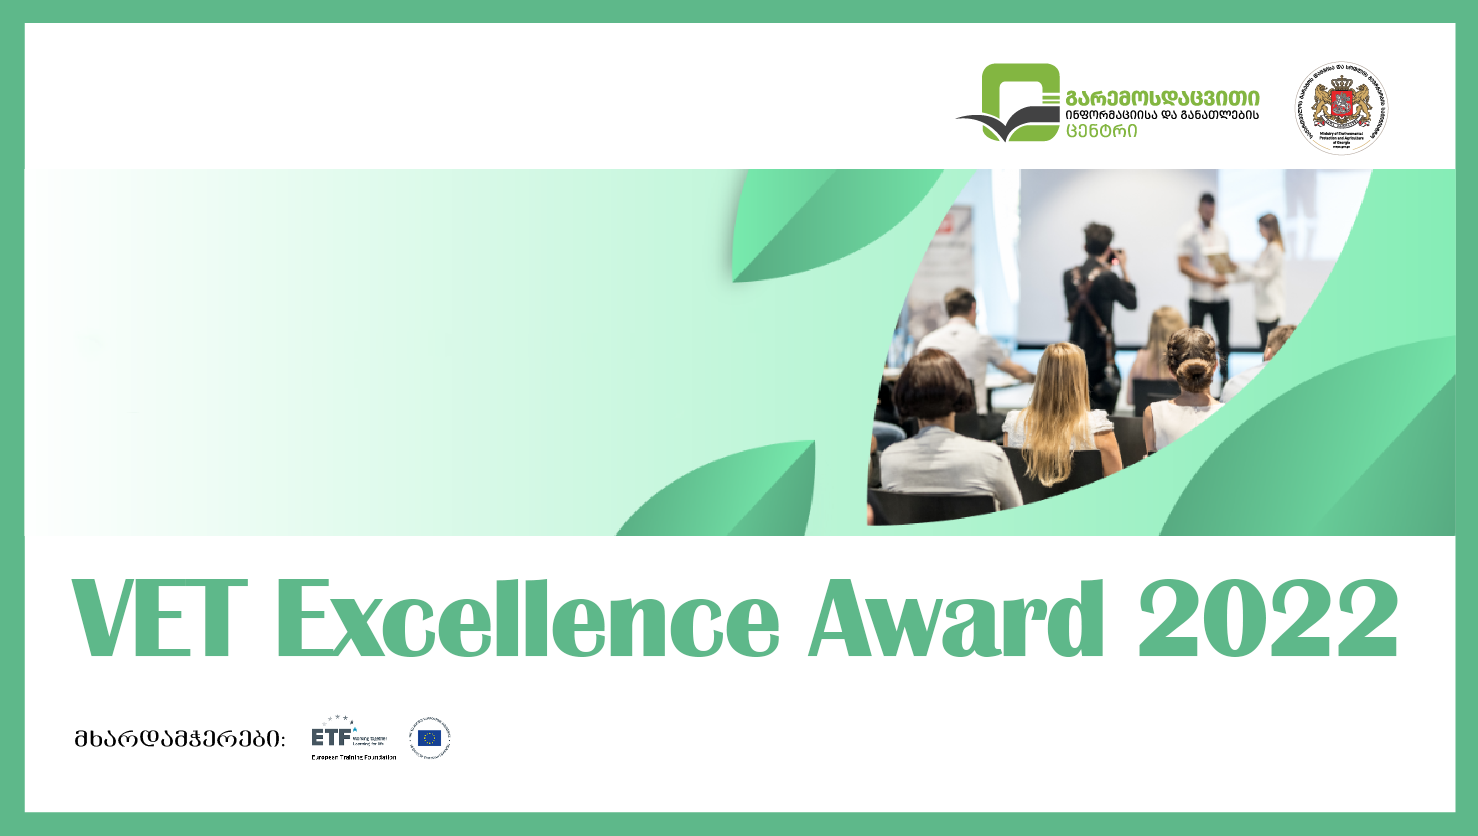 The program "Environmental and Agricultural Education in Schools" is the winner of the VET Excellence Award